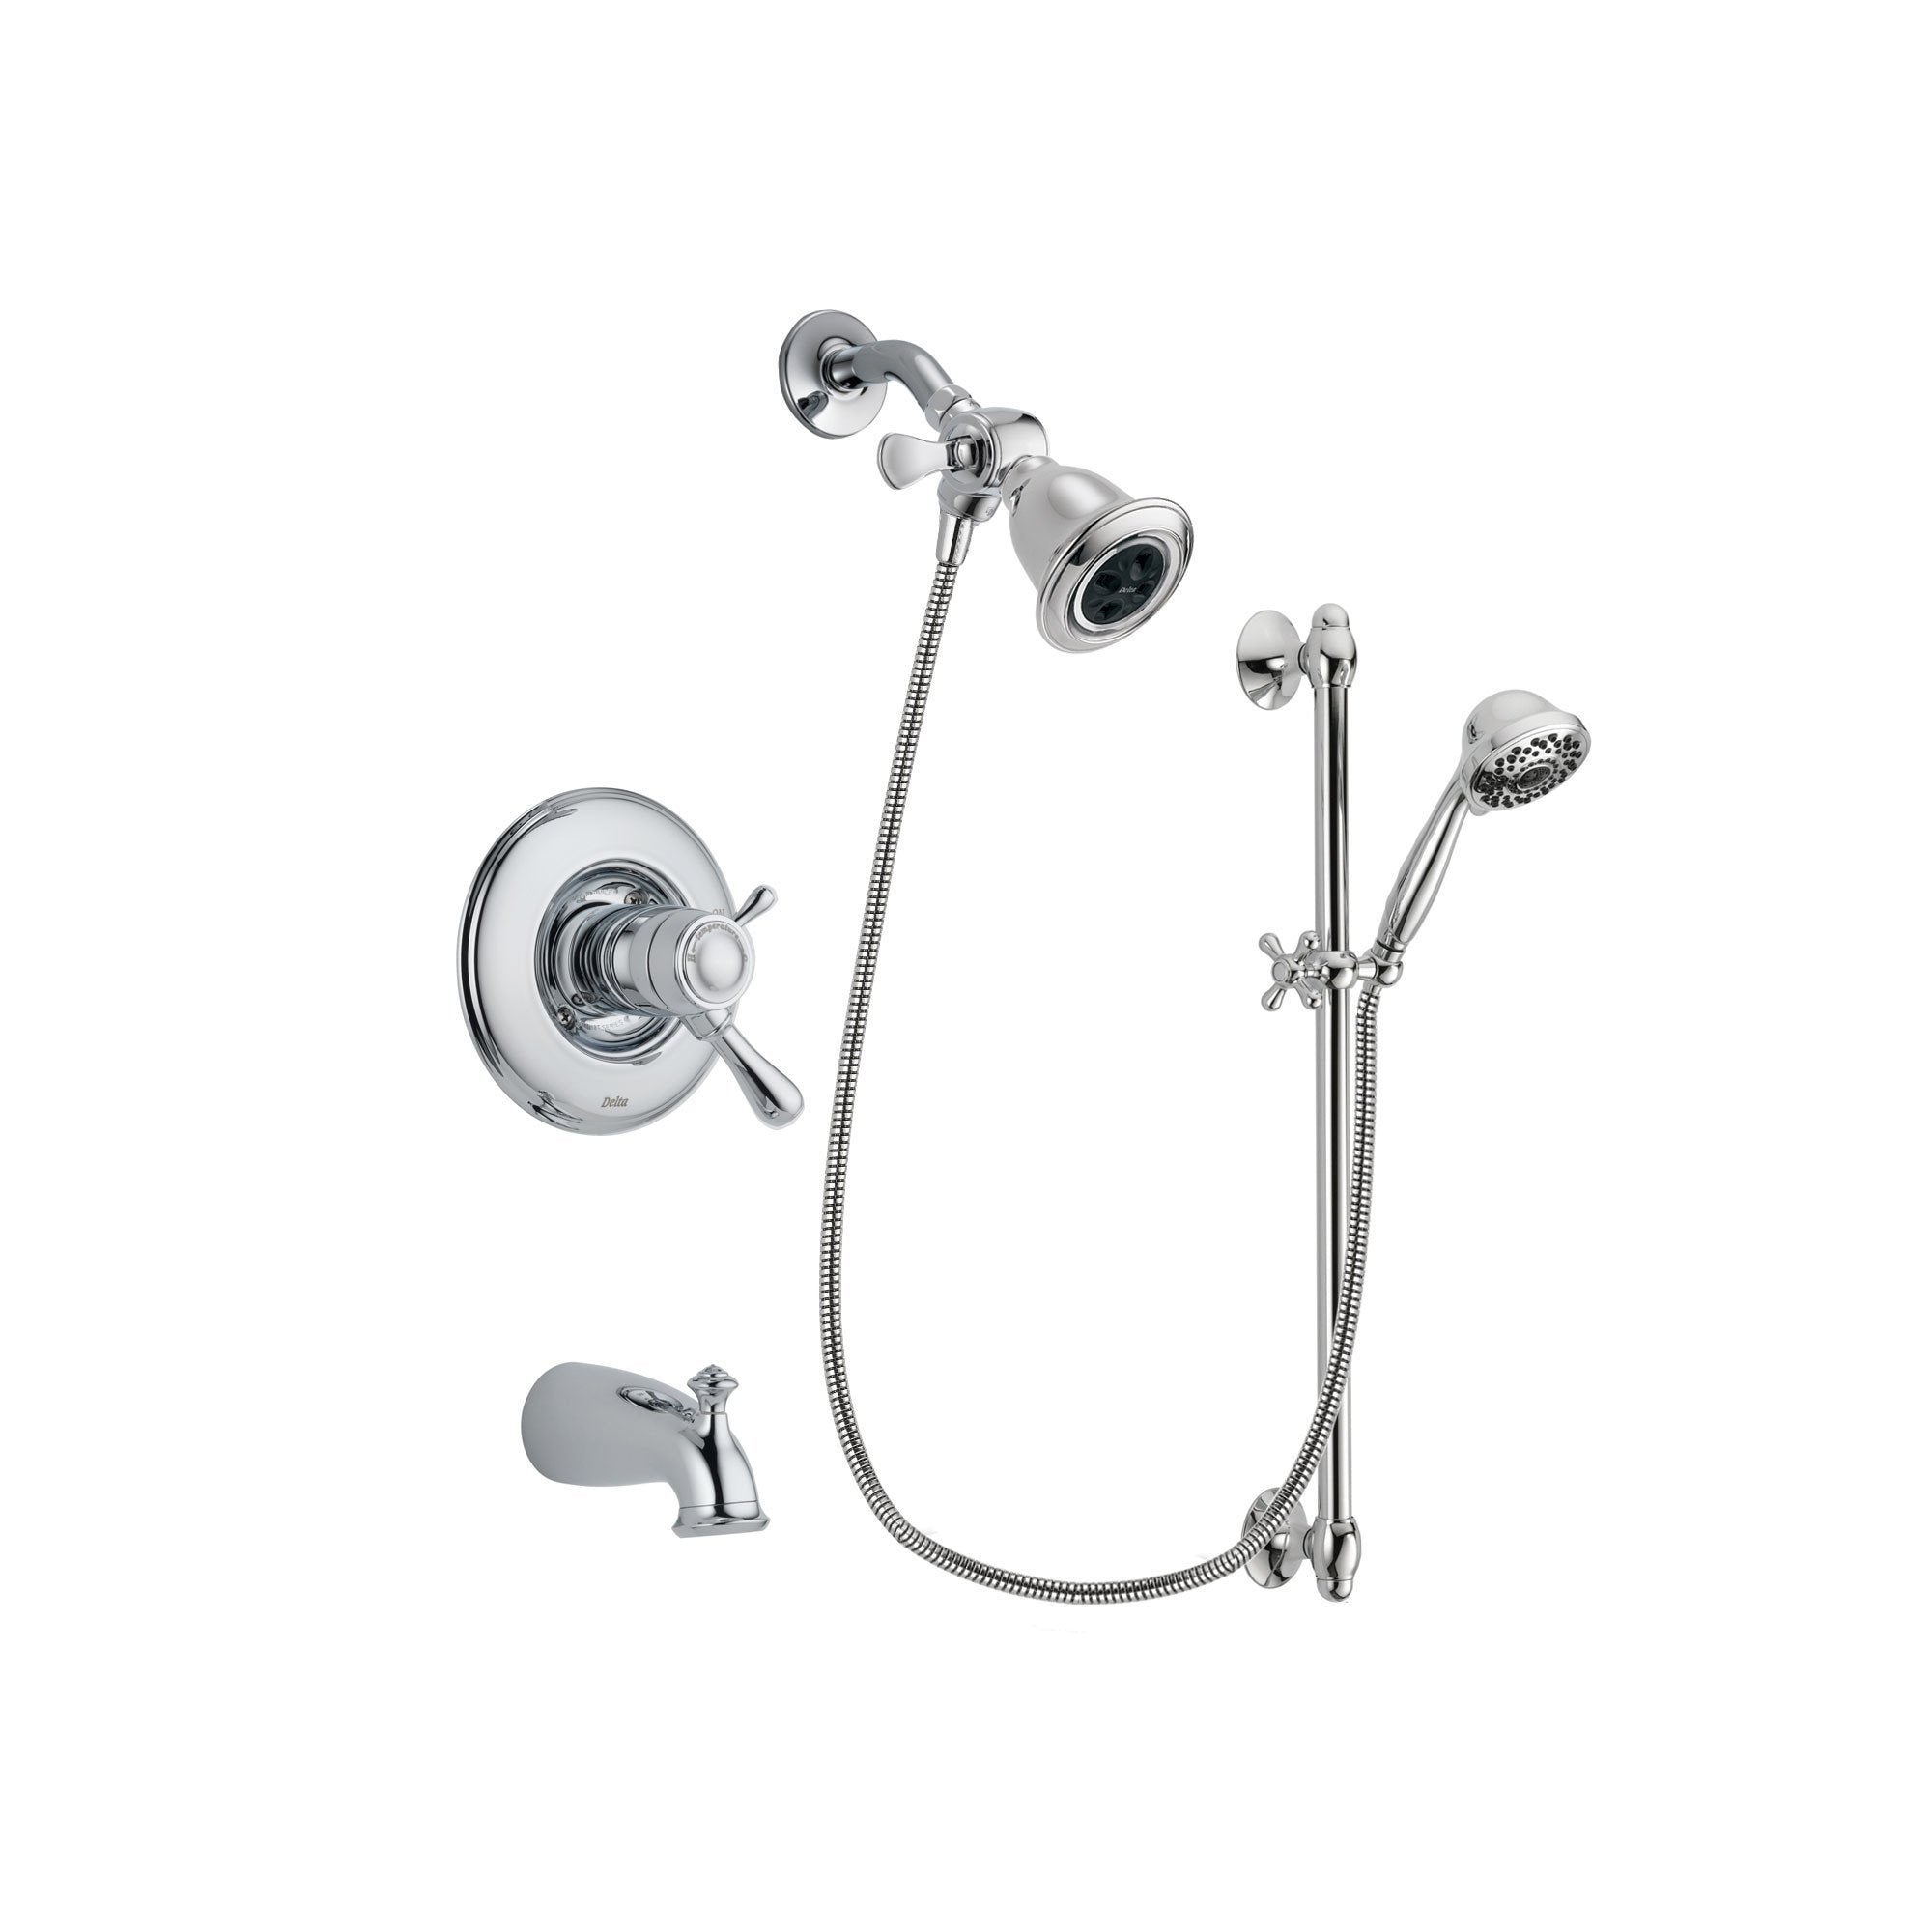 Delta Leland Chrome Finish Thermostatic Tub and Shower Faucet System Package with Water Efficient Showerhead and 7-Spray Handheld Shower Sprayer with Slide Bar Includes Rough-in Valve and Tub Spout DSP0599V